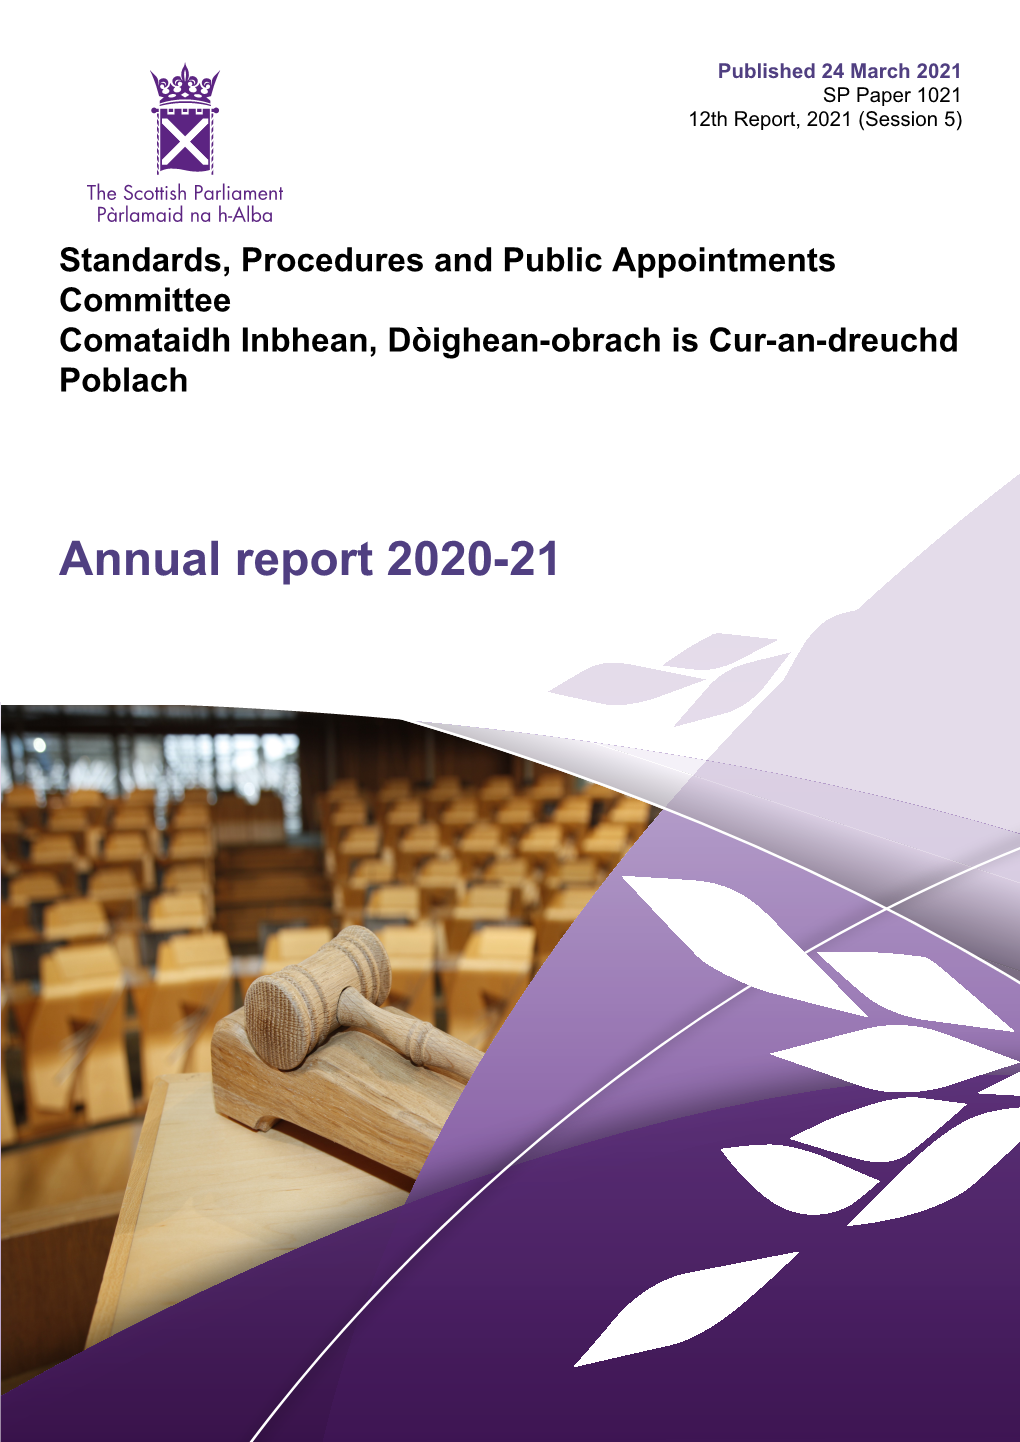 Annual Report 2020-21 Published in Scotland by the Scottish Parliamentary Corporate Body